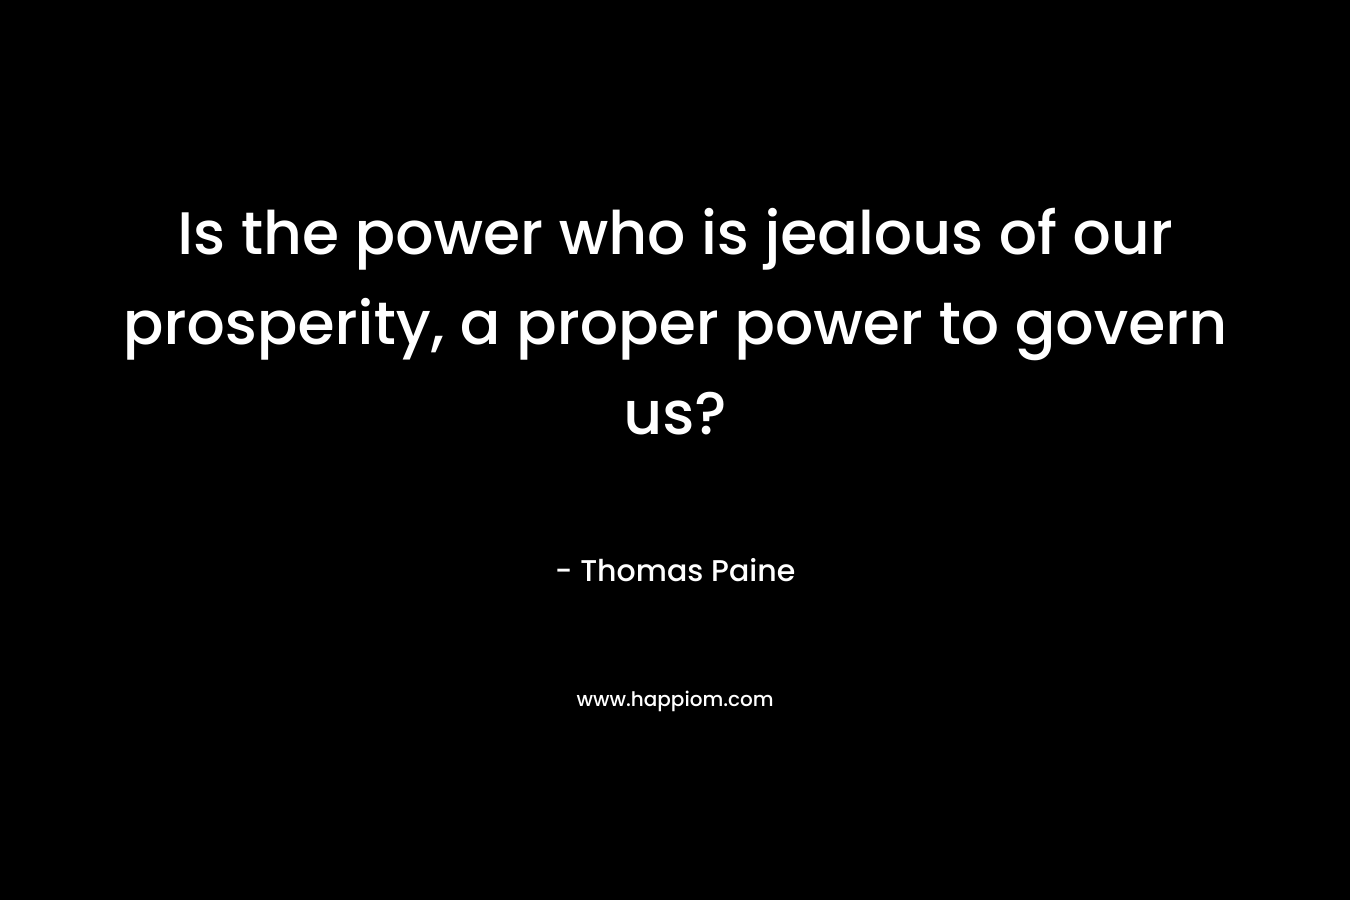 Is the power who is jealous of our prosperity, a proper power to govern us? – Thomas Paine